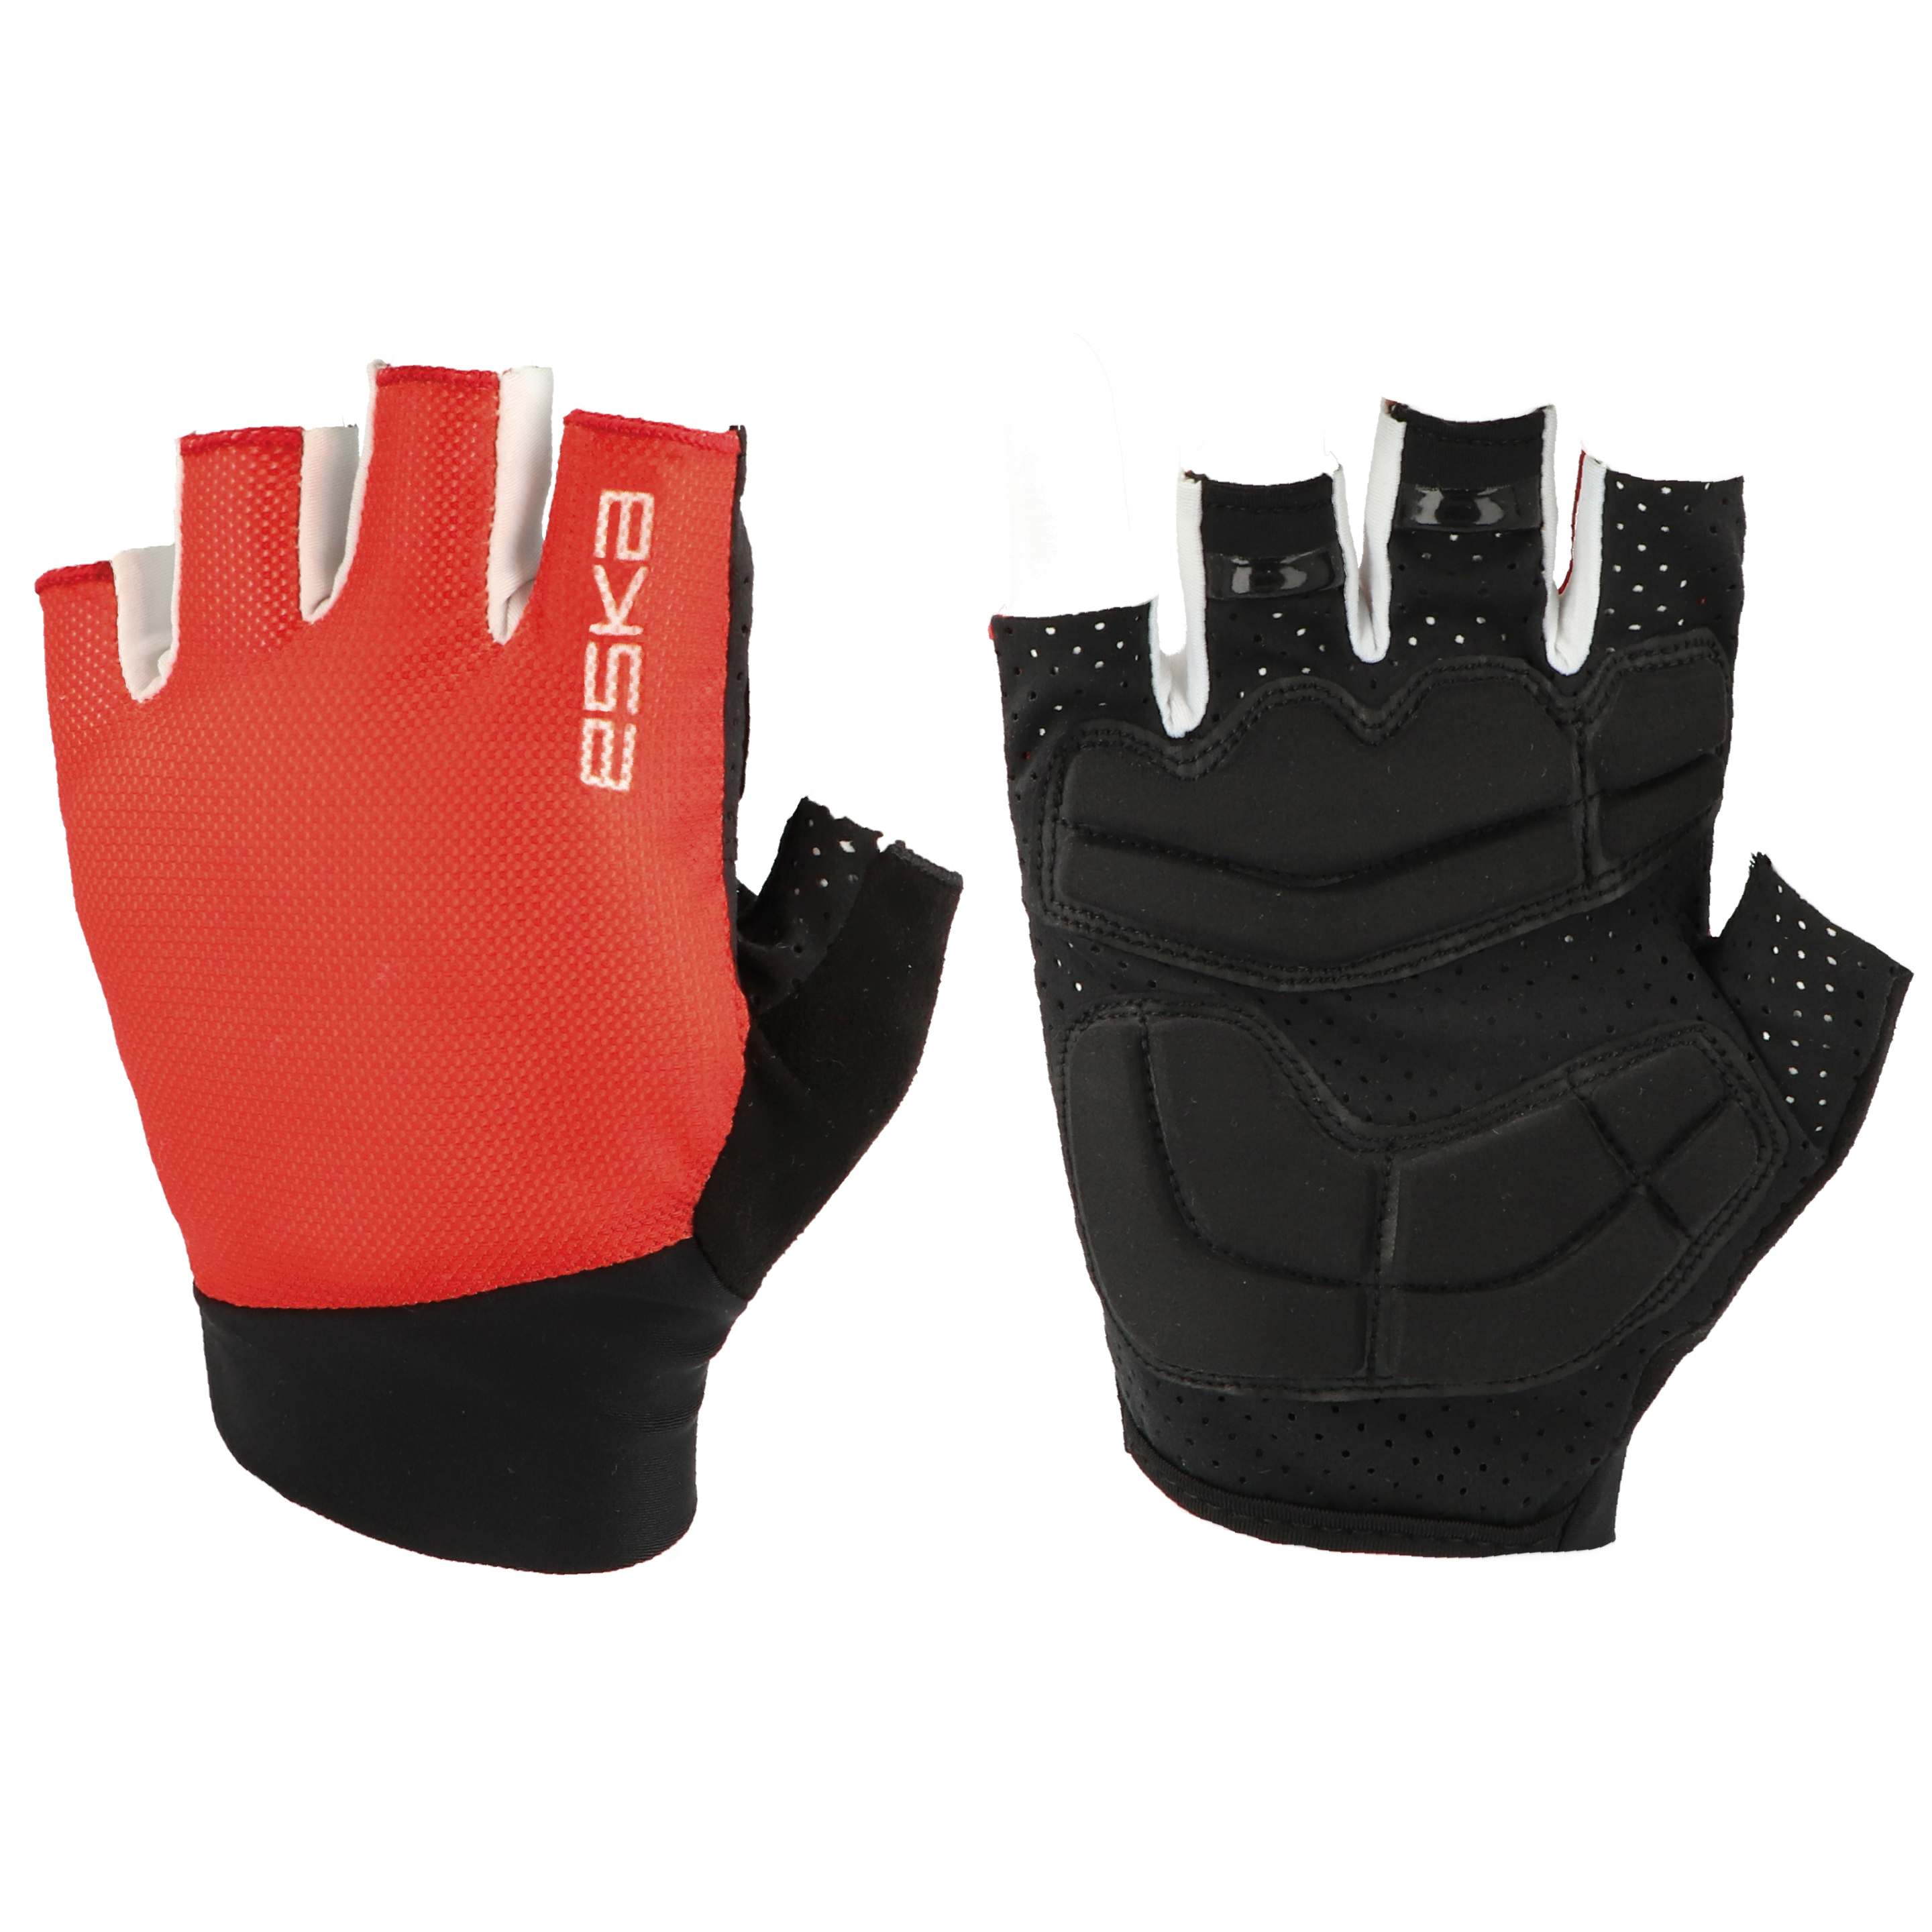 Souke Sports Cycling Bike Gloves Padded Half Finger Bicycle Gloves